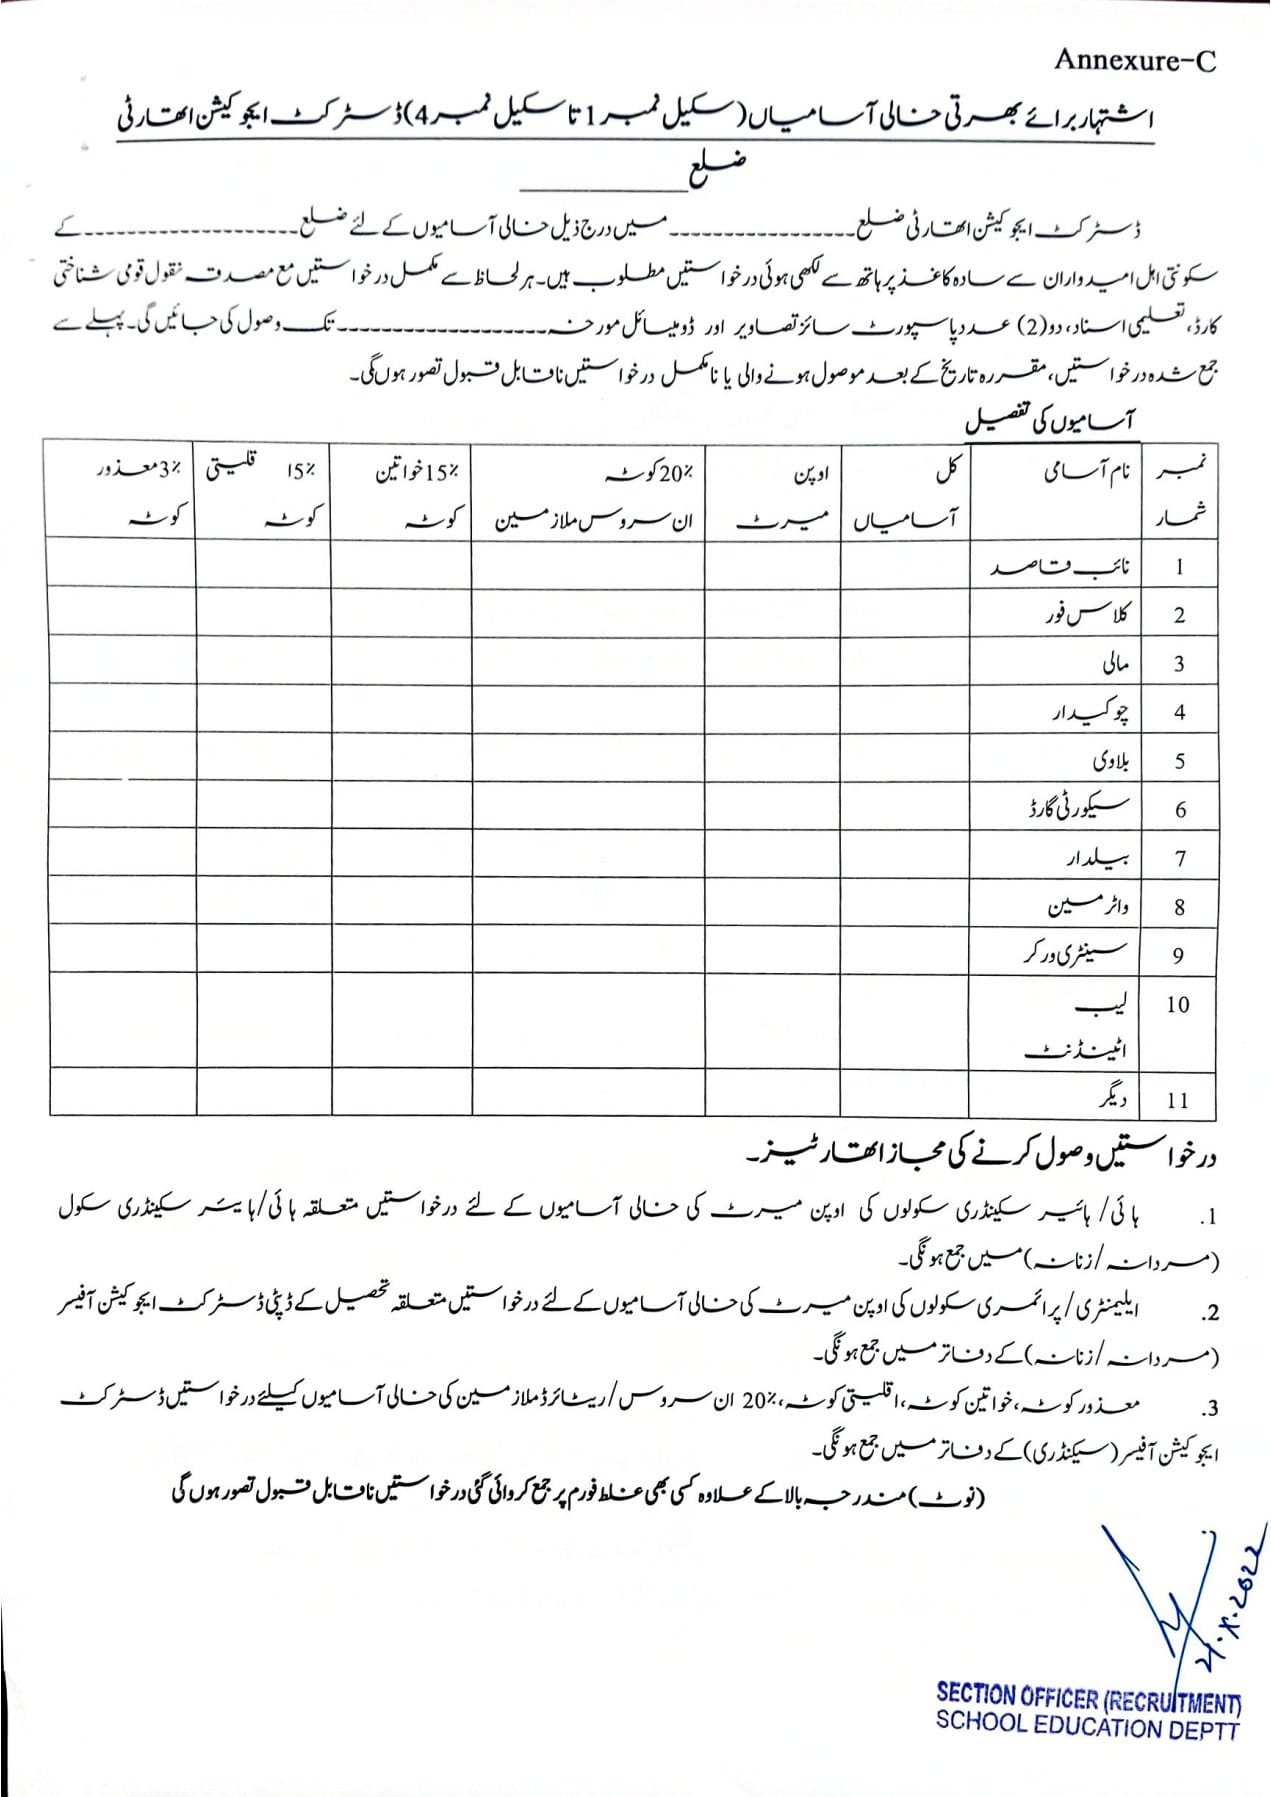 Recruitment of Non-Teaching Staff (BPS-01 to BPS-04) Punjab School Education Department SED